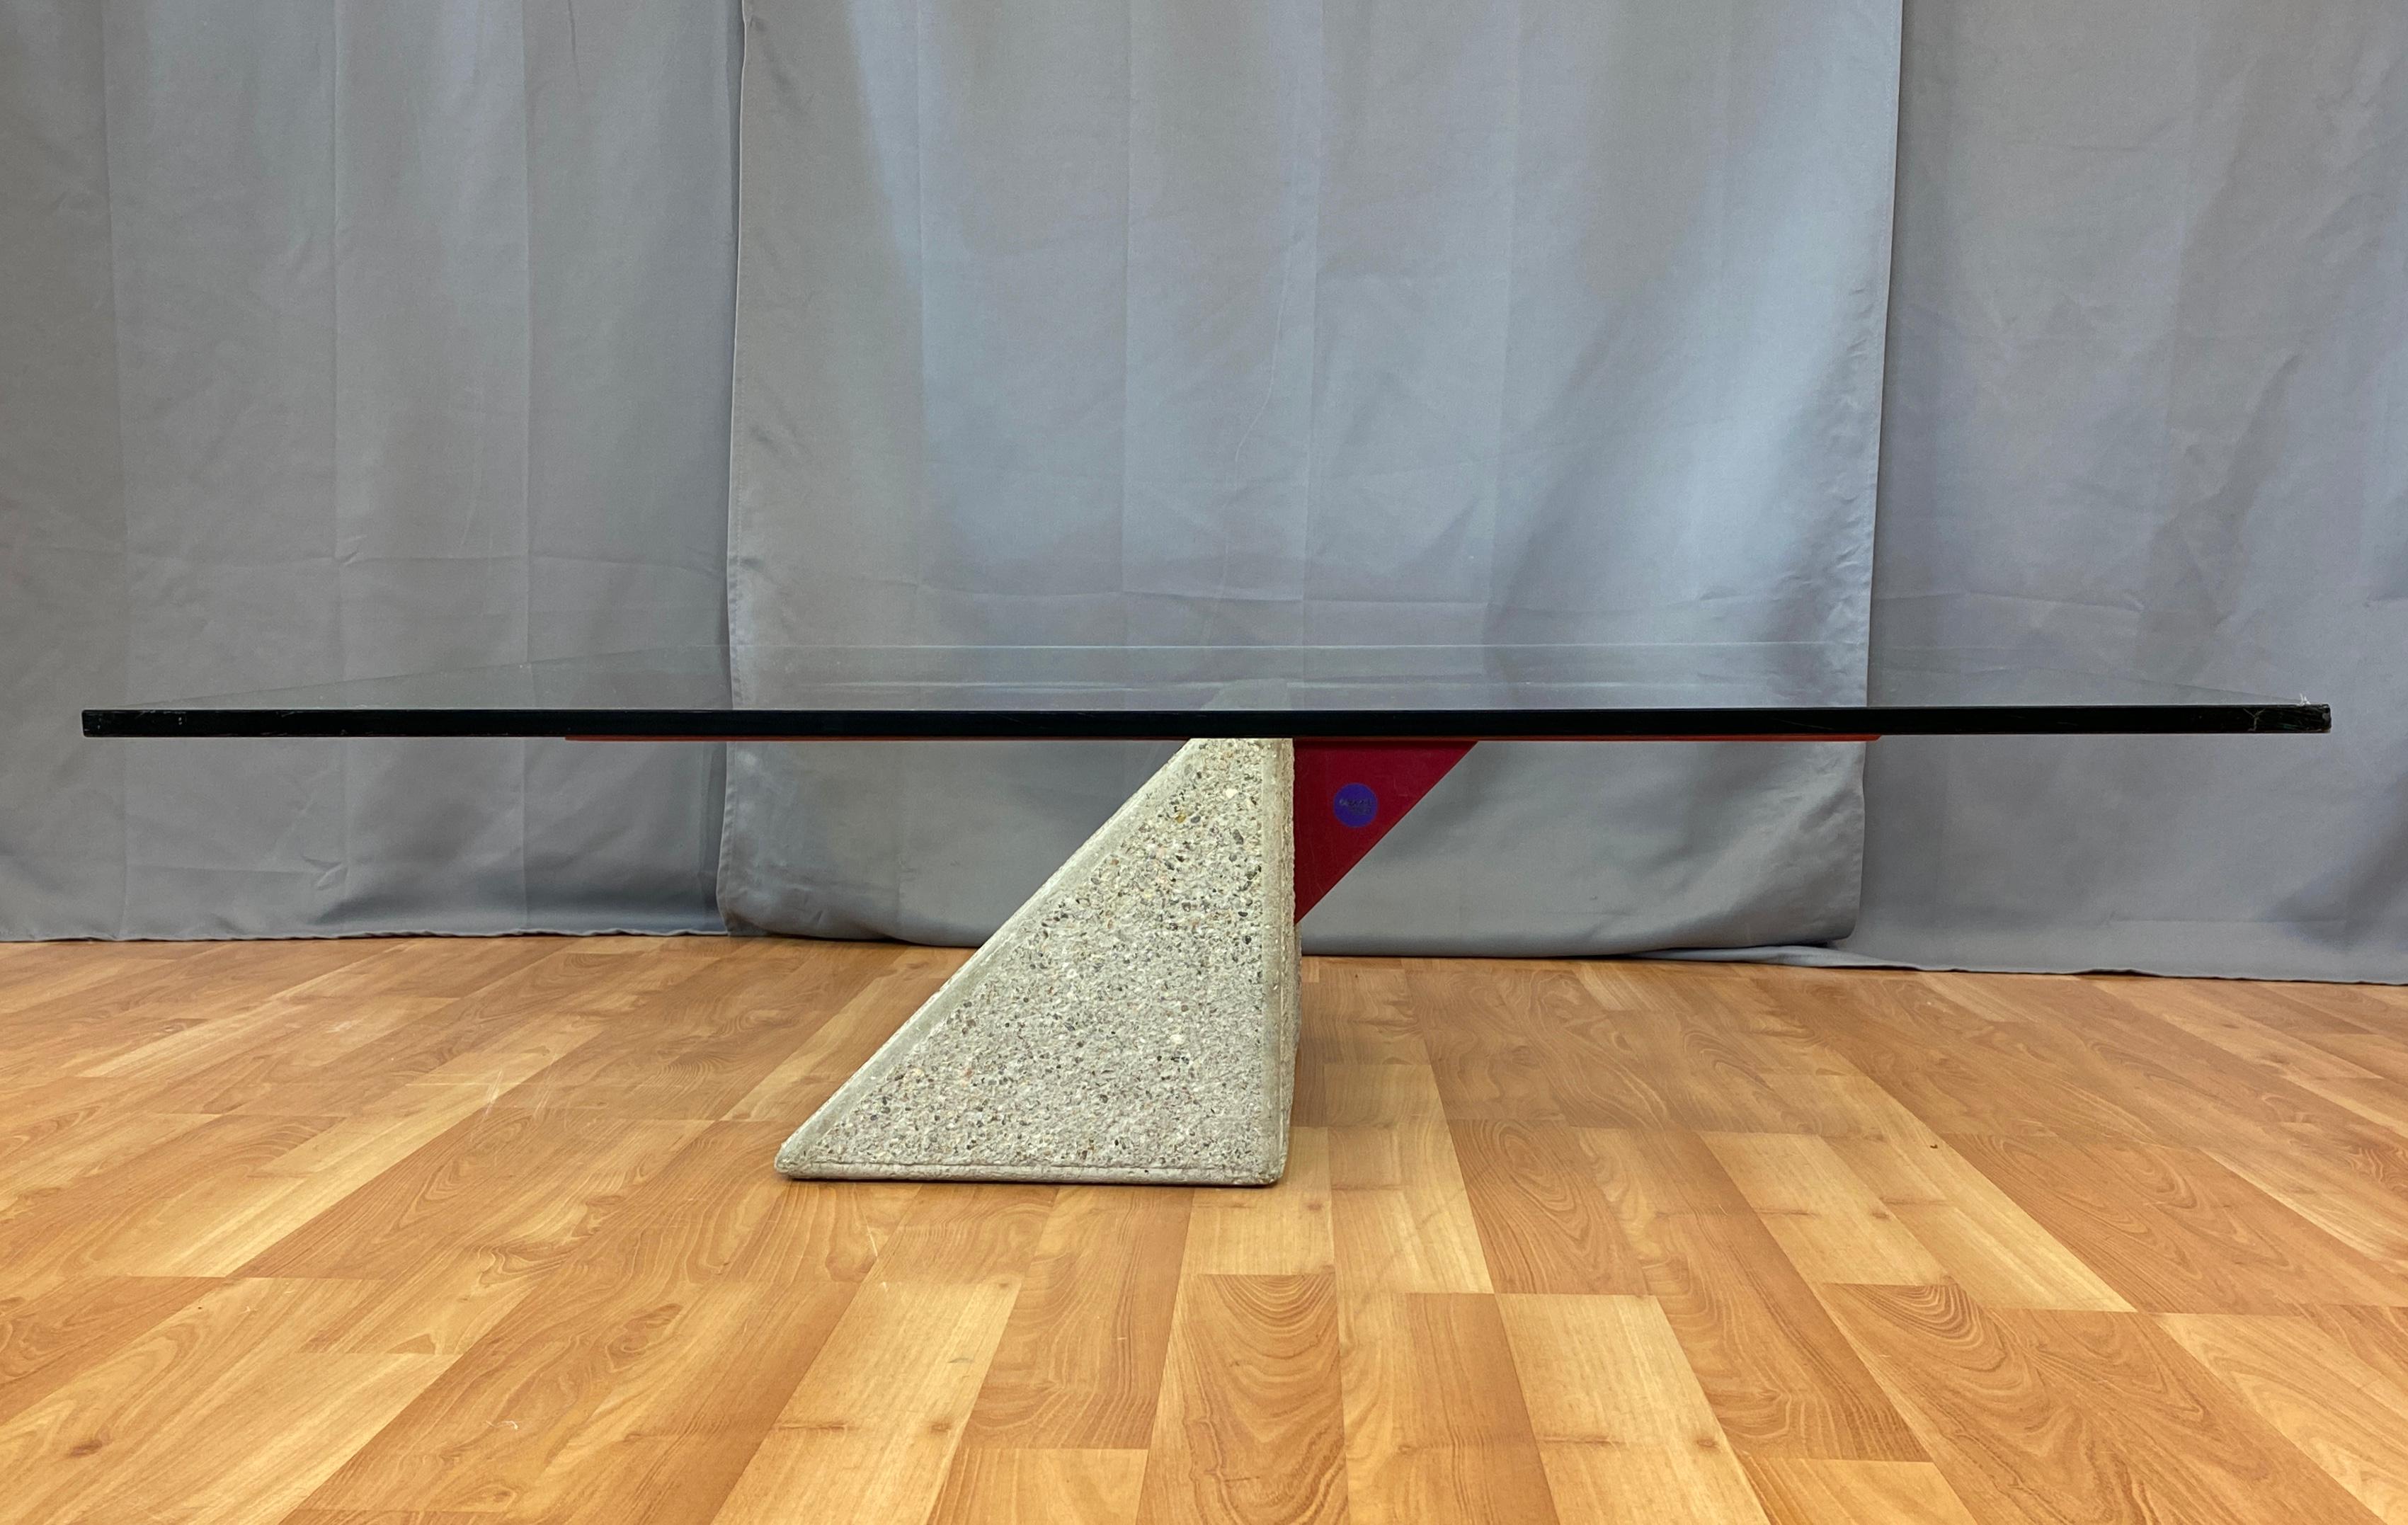 A circa 1980s concrete, red tubular and red flat metal for the base, with a large glass top, coffee table. 
Designed by Giovanni Offredi for Saporiti Italia 

The base is 14in x 22 3/8in, glass is 1/2in thick